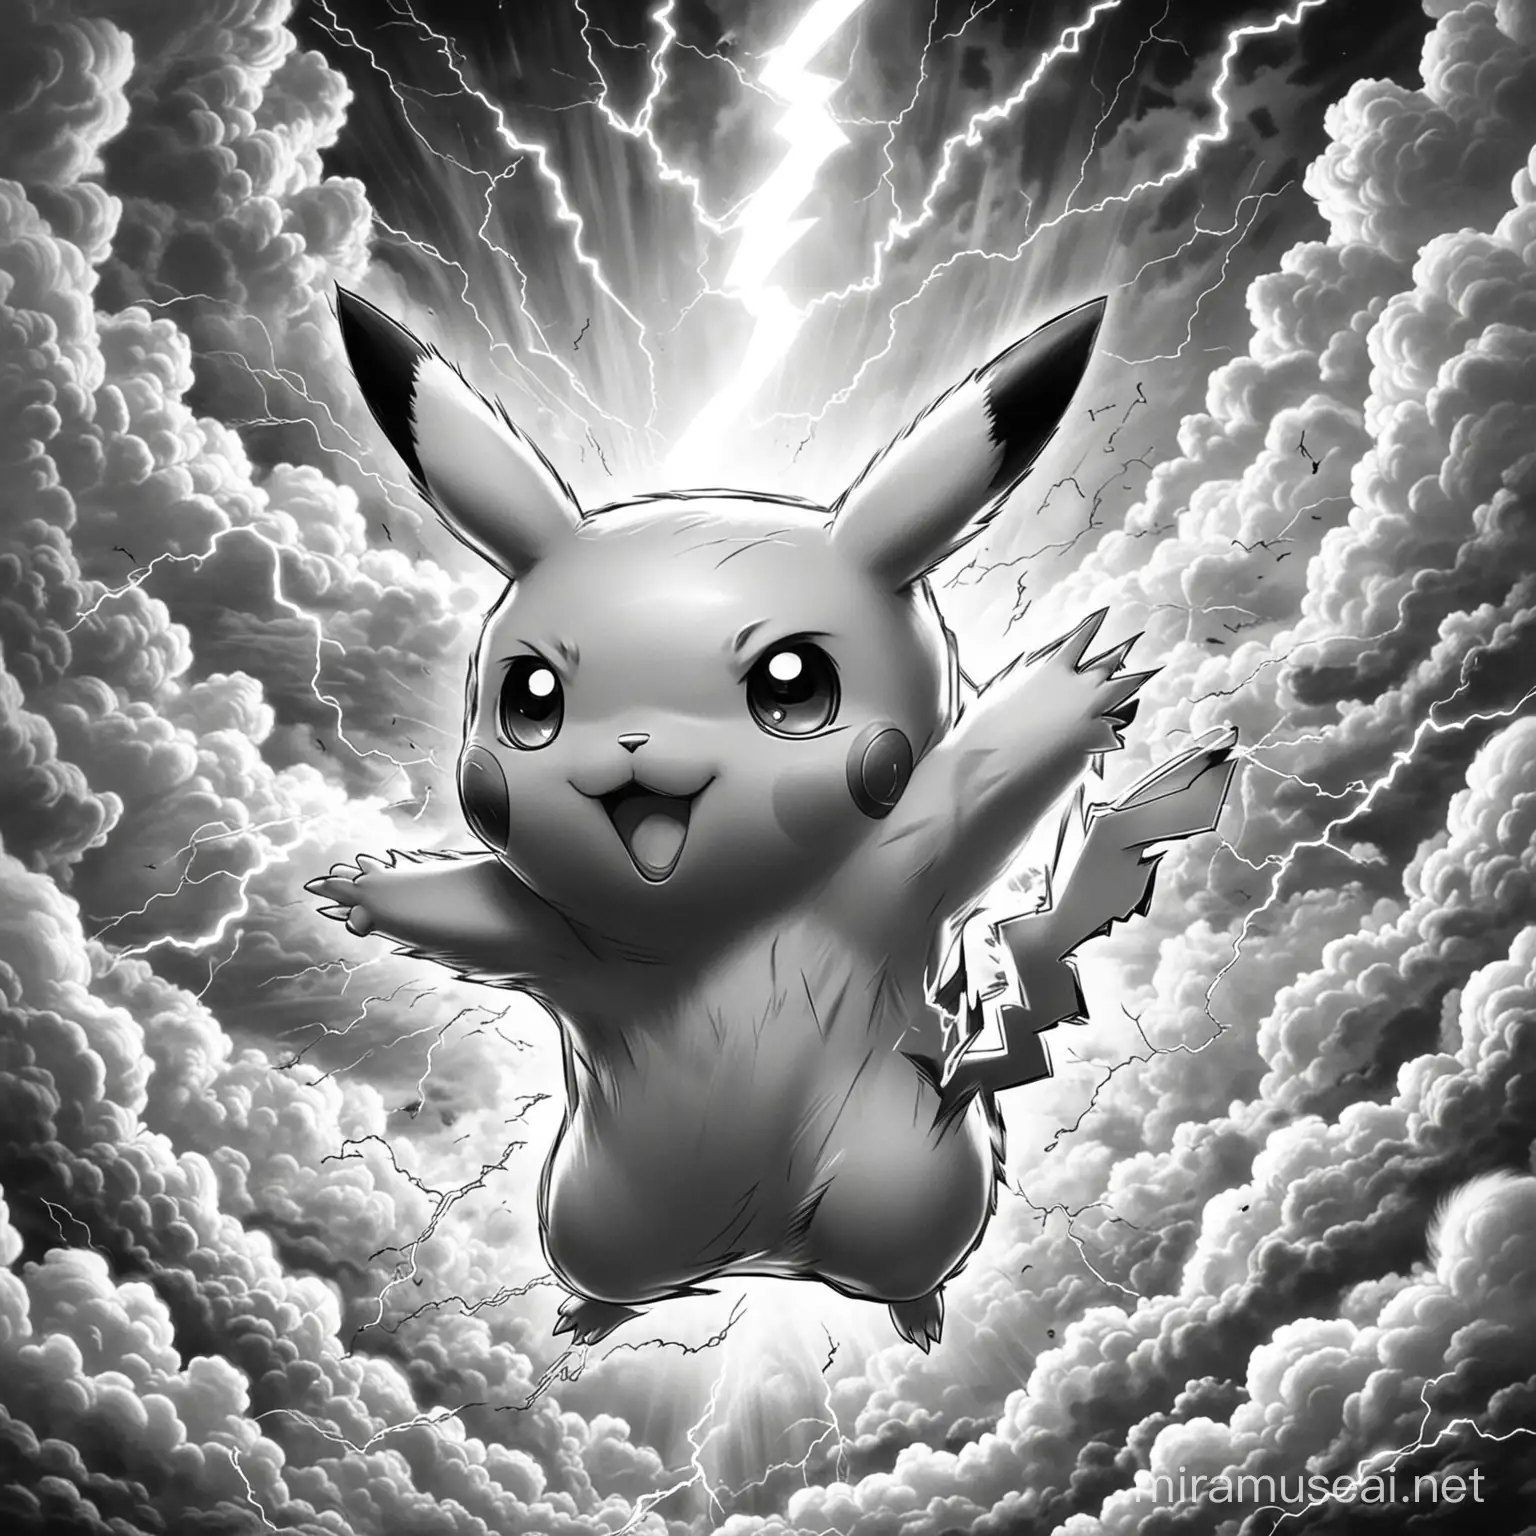 Pikachu Lightning Bolt Attack Coloring Page